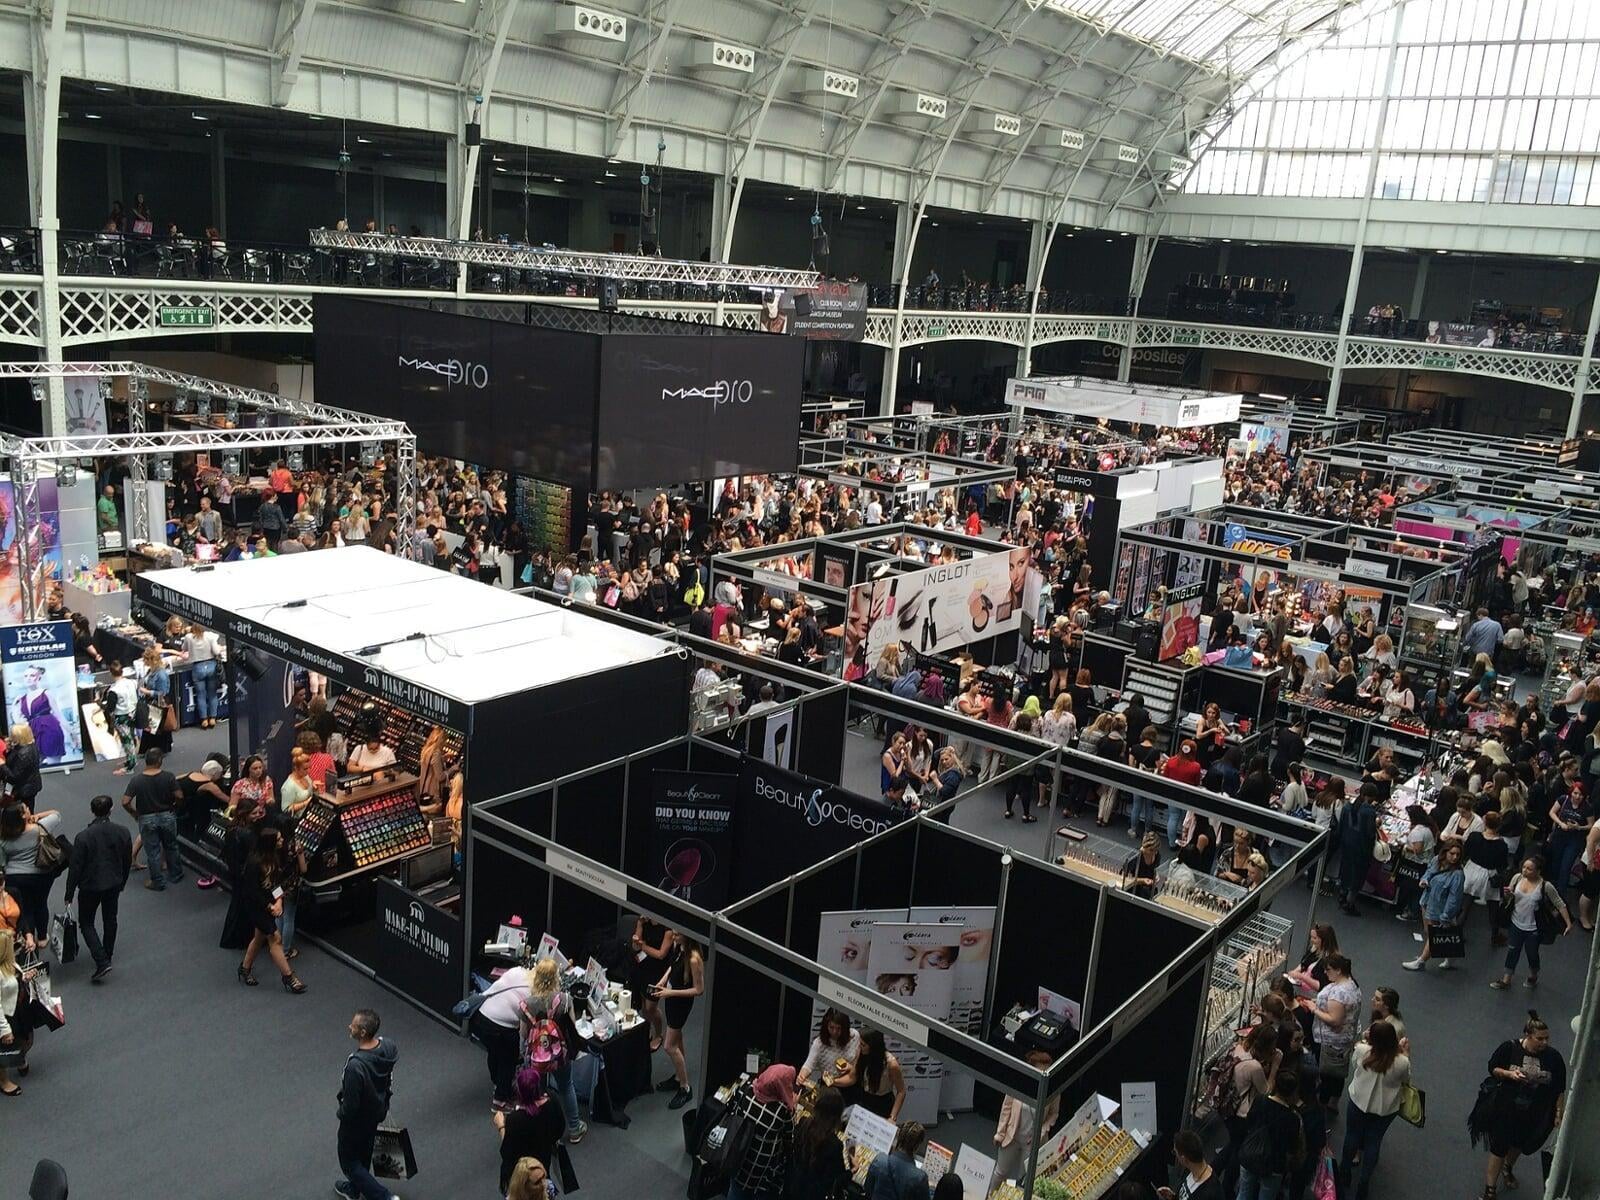 A large open and airy exhibition hall with multiple trade stands and busy attendees.